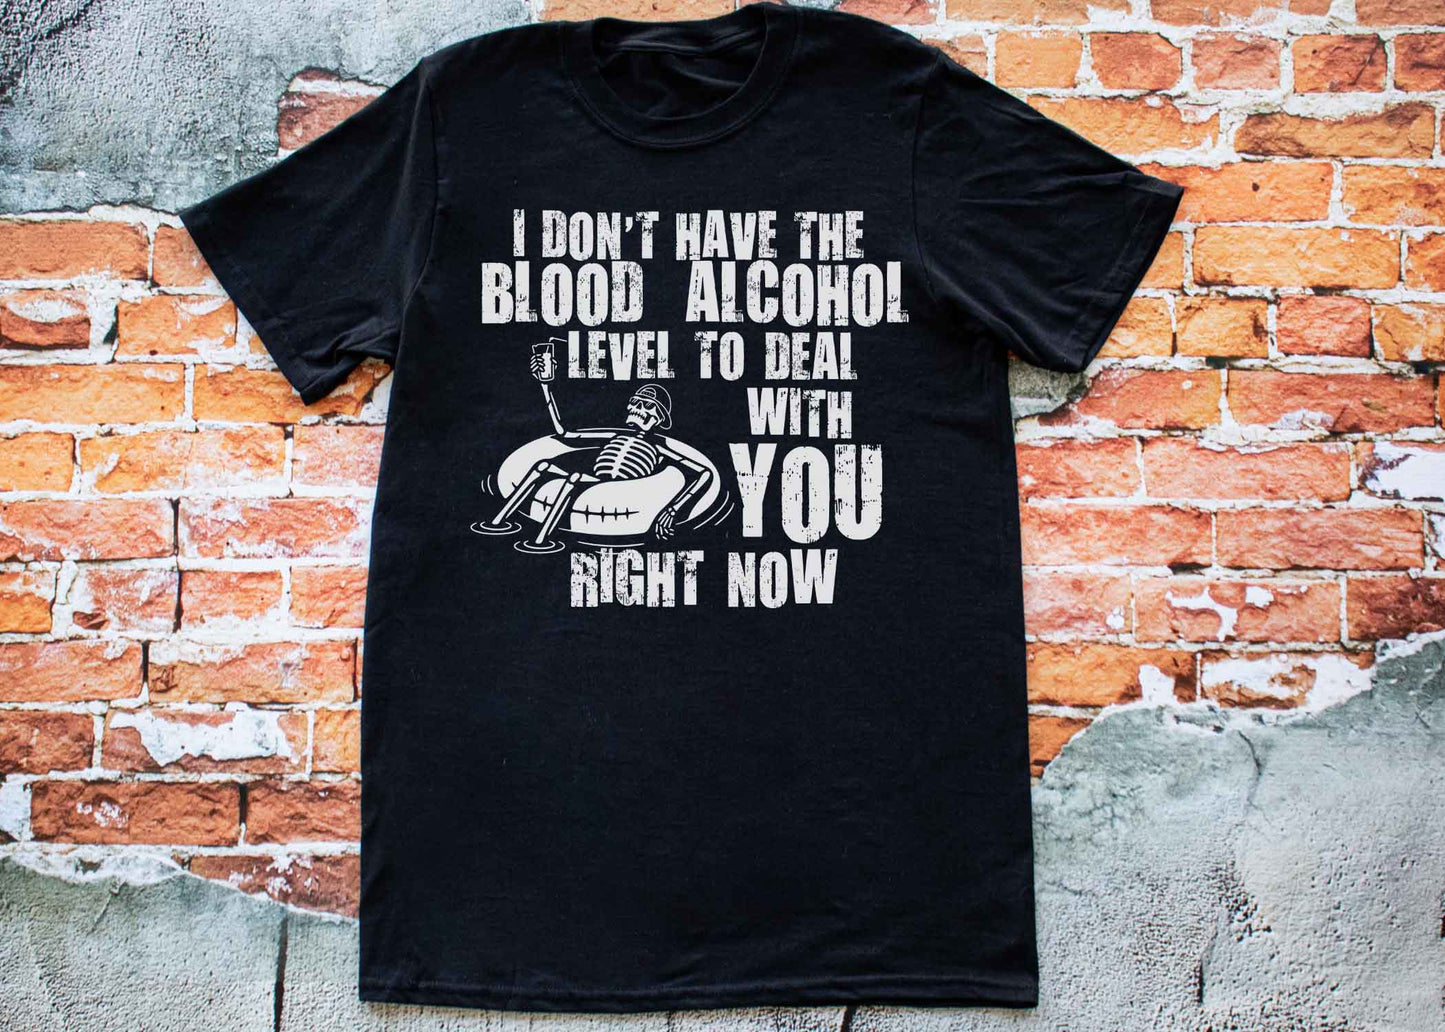 T-Shirt Men's I DON'T HAVE THE BLOOD ALCOHOL LEVEL TO DEAL WITH YOU RIGHT NOW